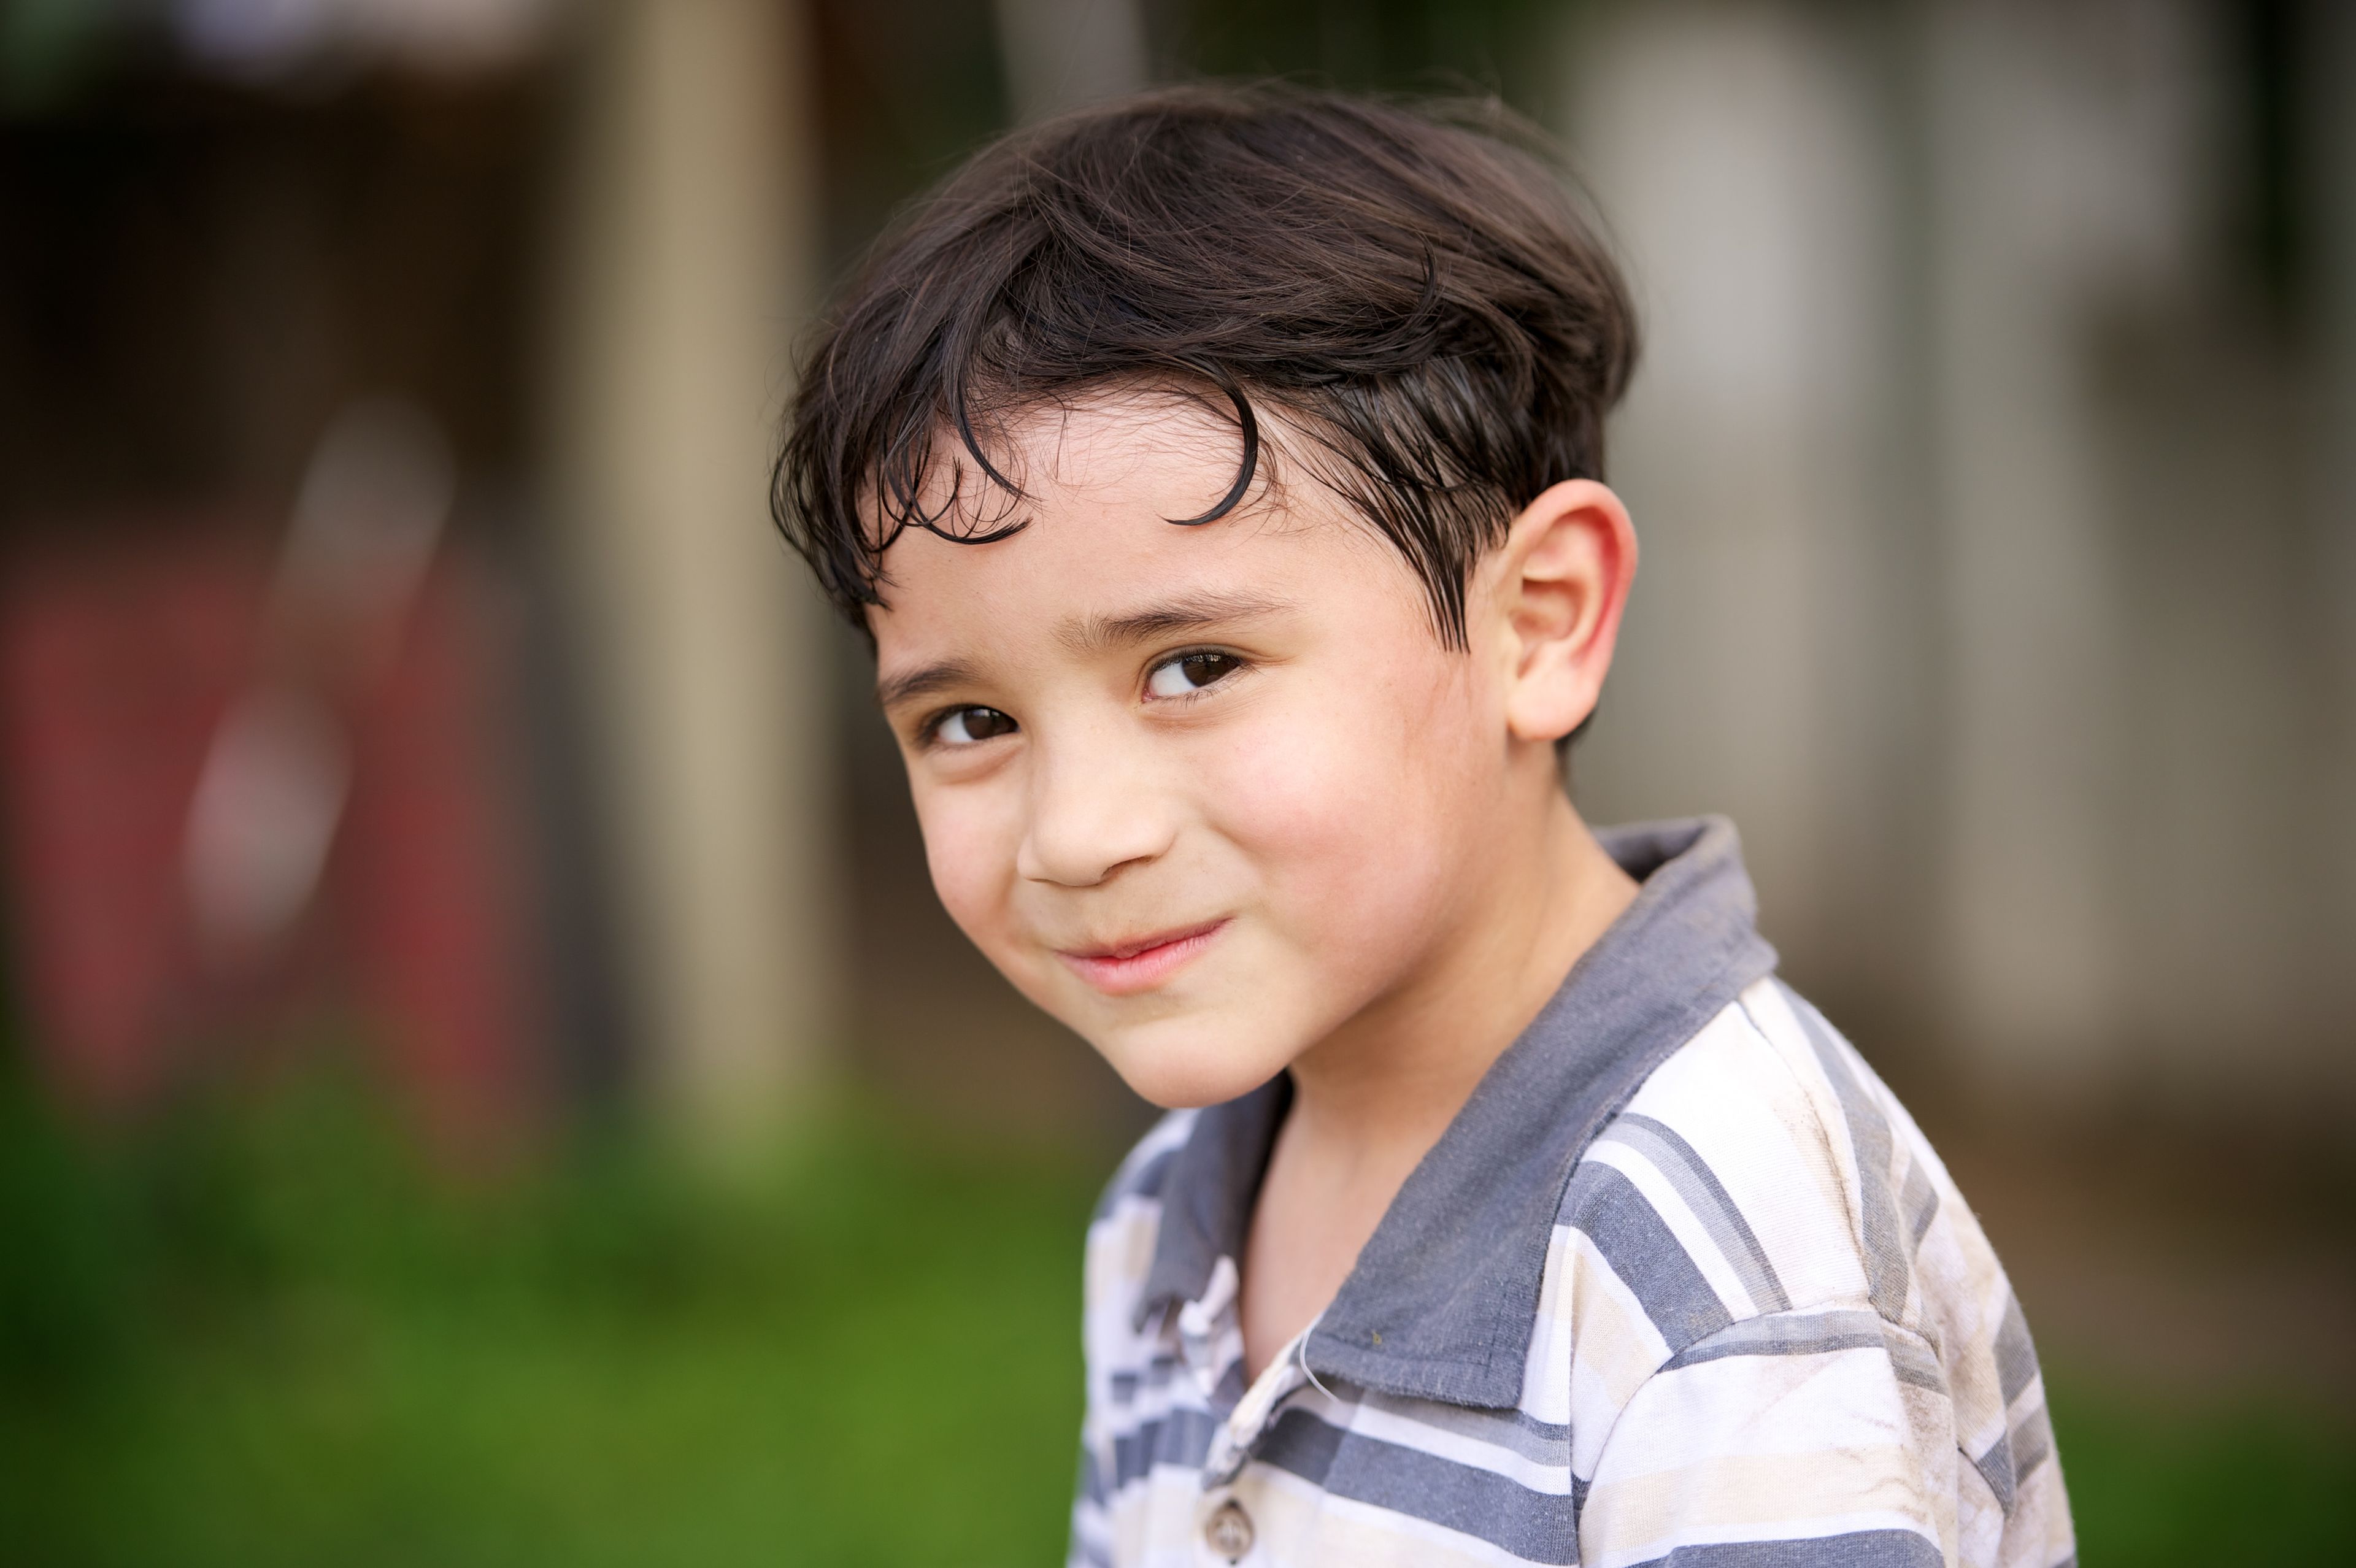 A portrait of a young boy in Argentina.